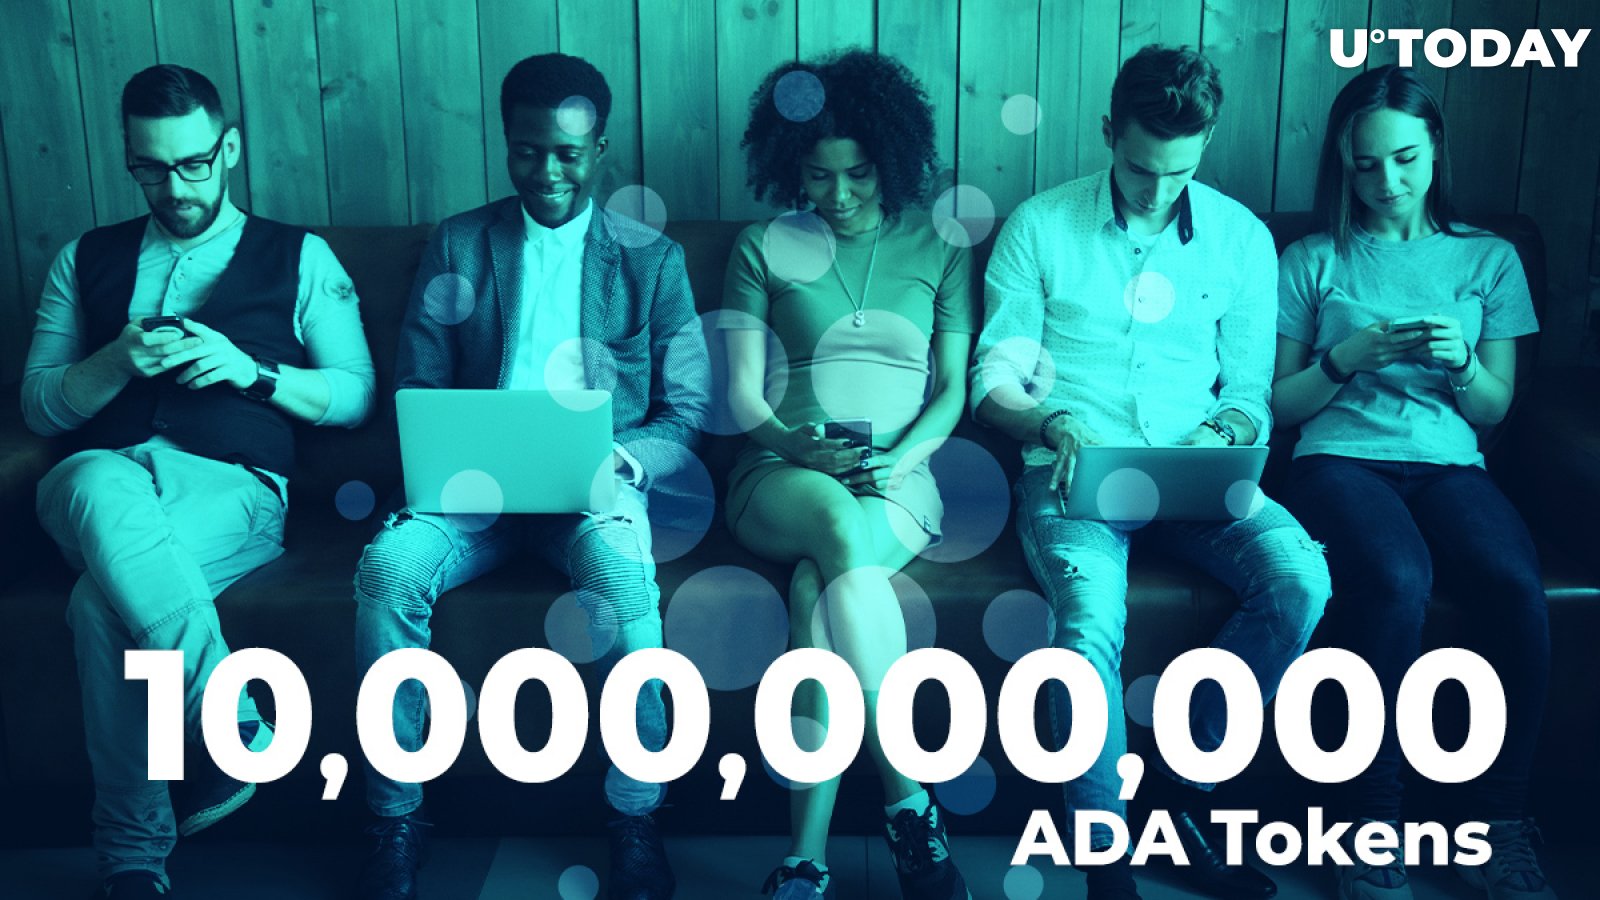 More Than 10,000,000,000 ADA Tokens Now Staked by Cardano Users